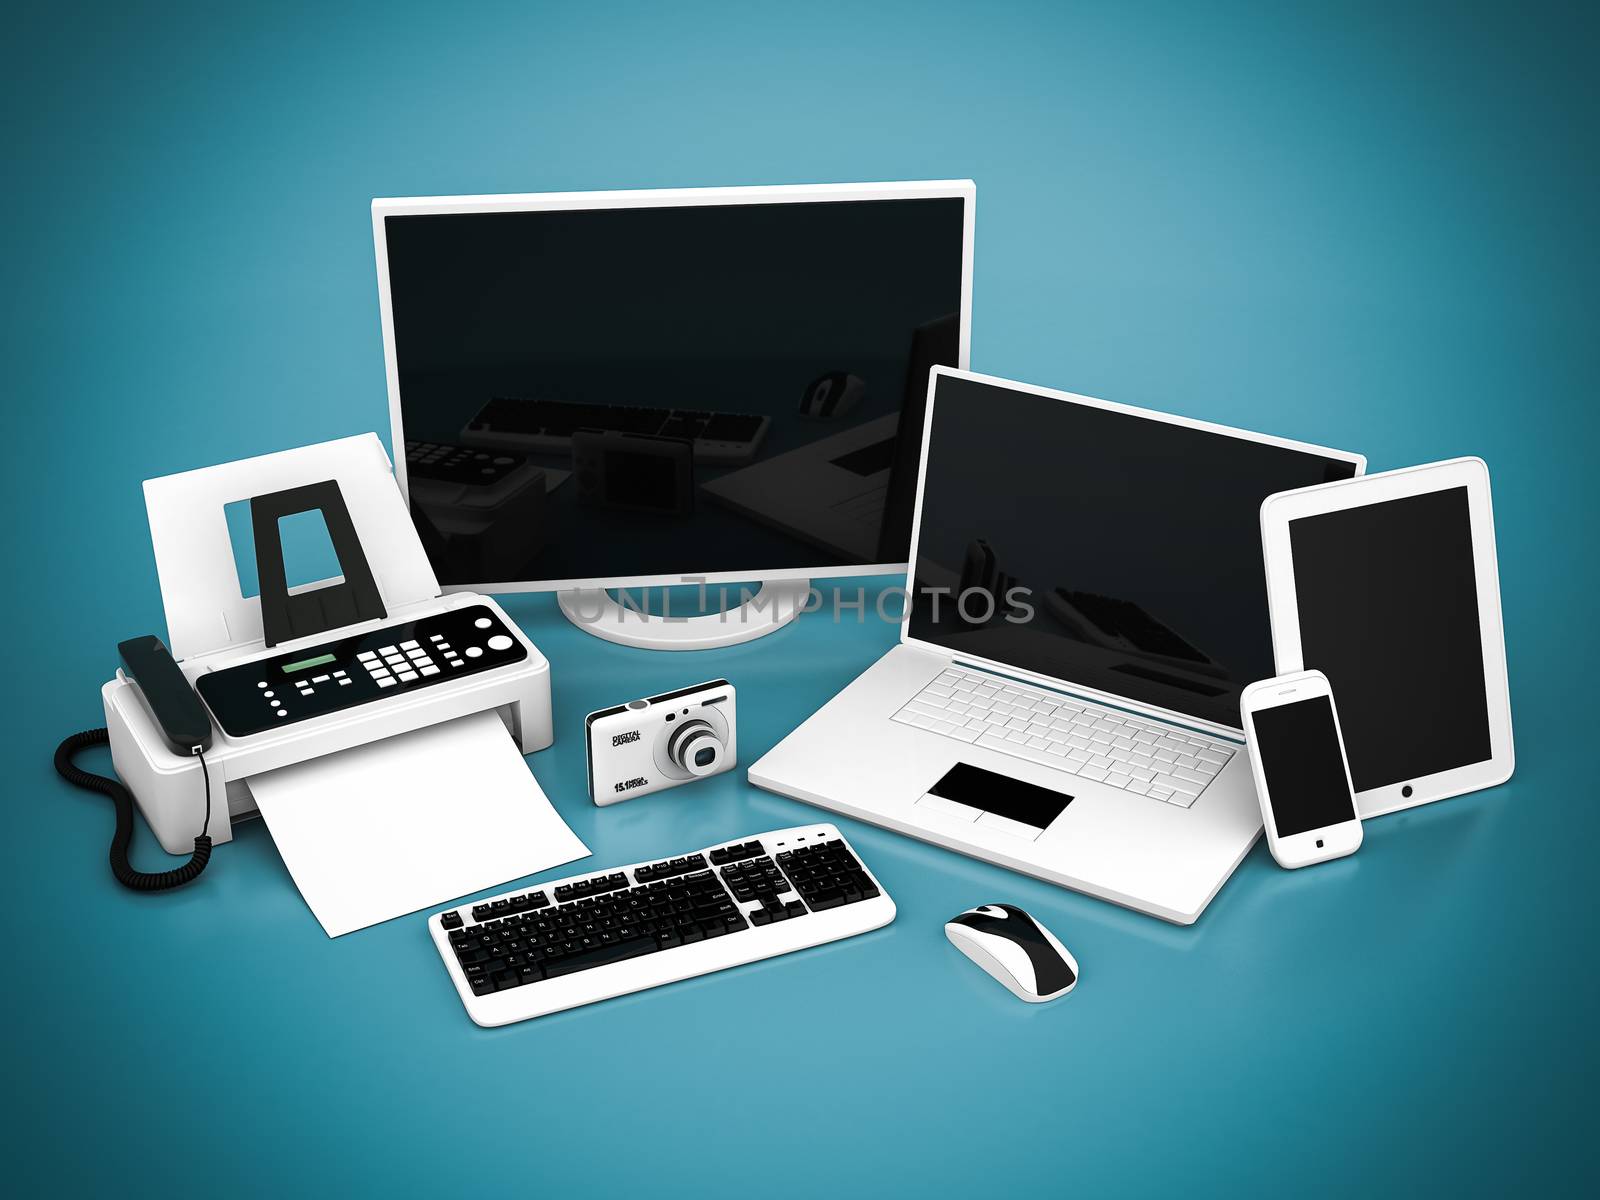 Laptop, Tablet PC and Smartphone on a blue background